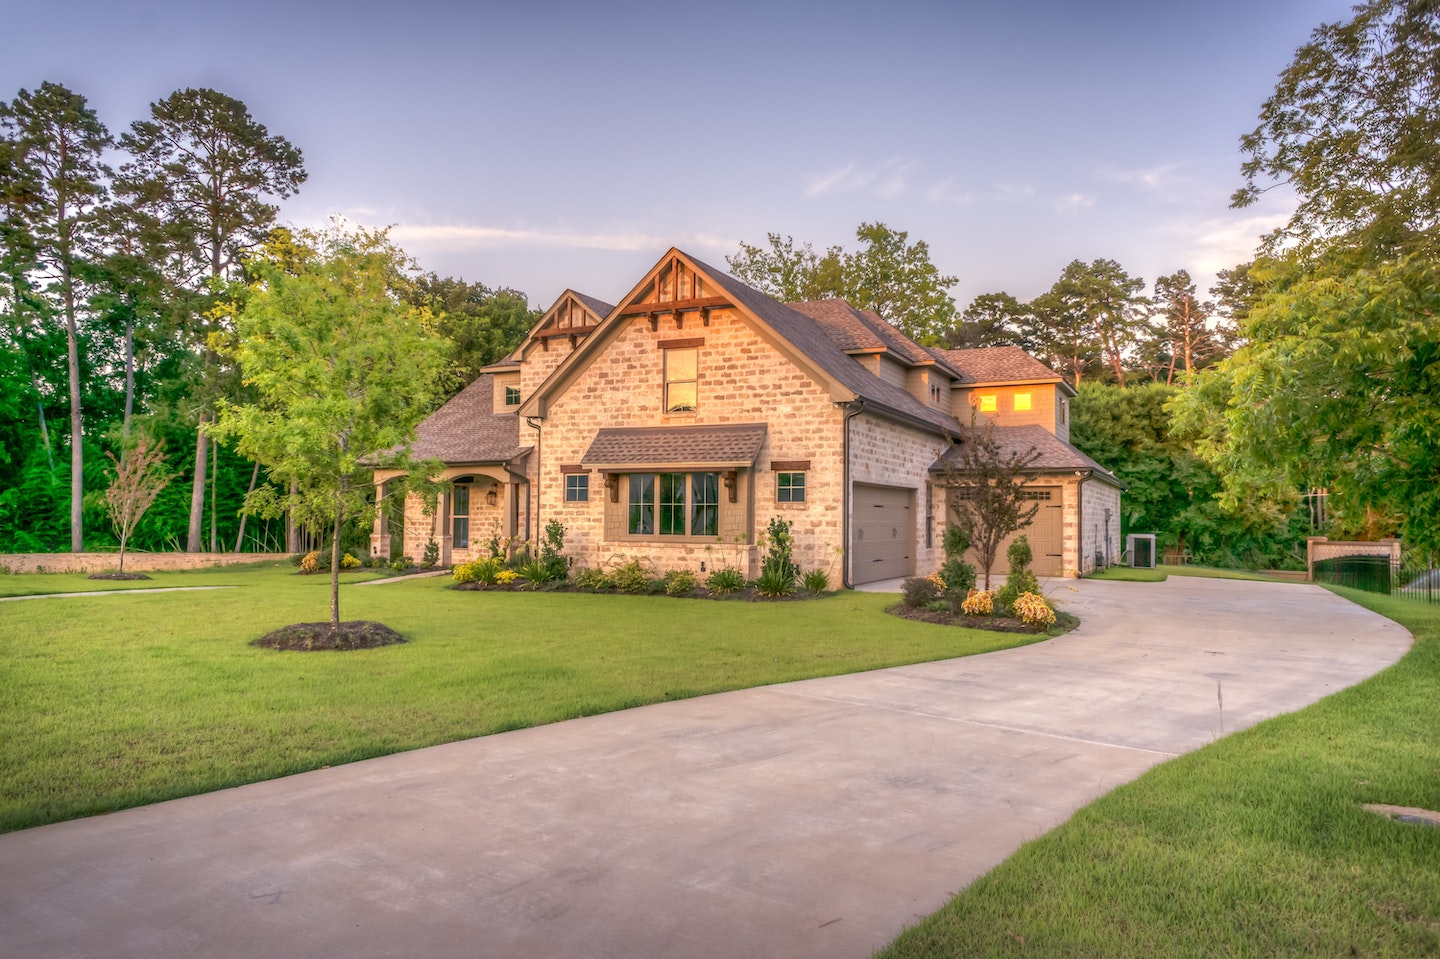 Beautiful stone house at dusk with green lawn